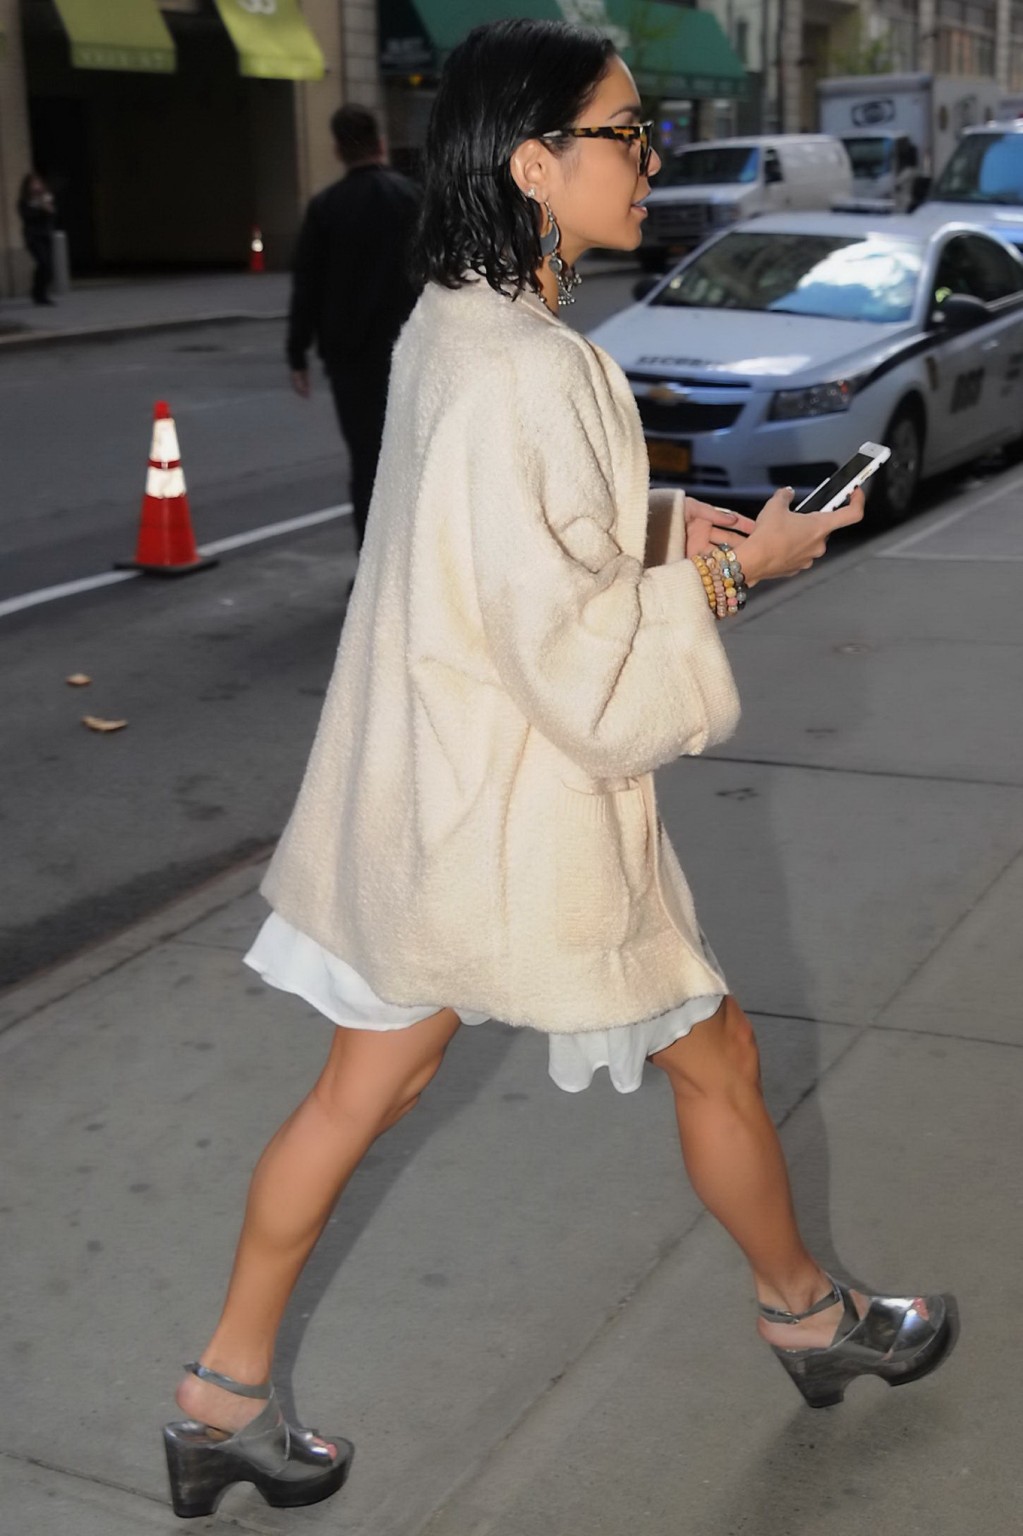 Vanessa Hudgens braless showing big cleavage in white mini dress out in NYC #75165434